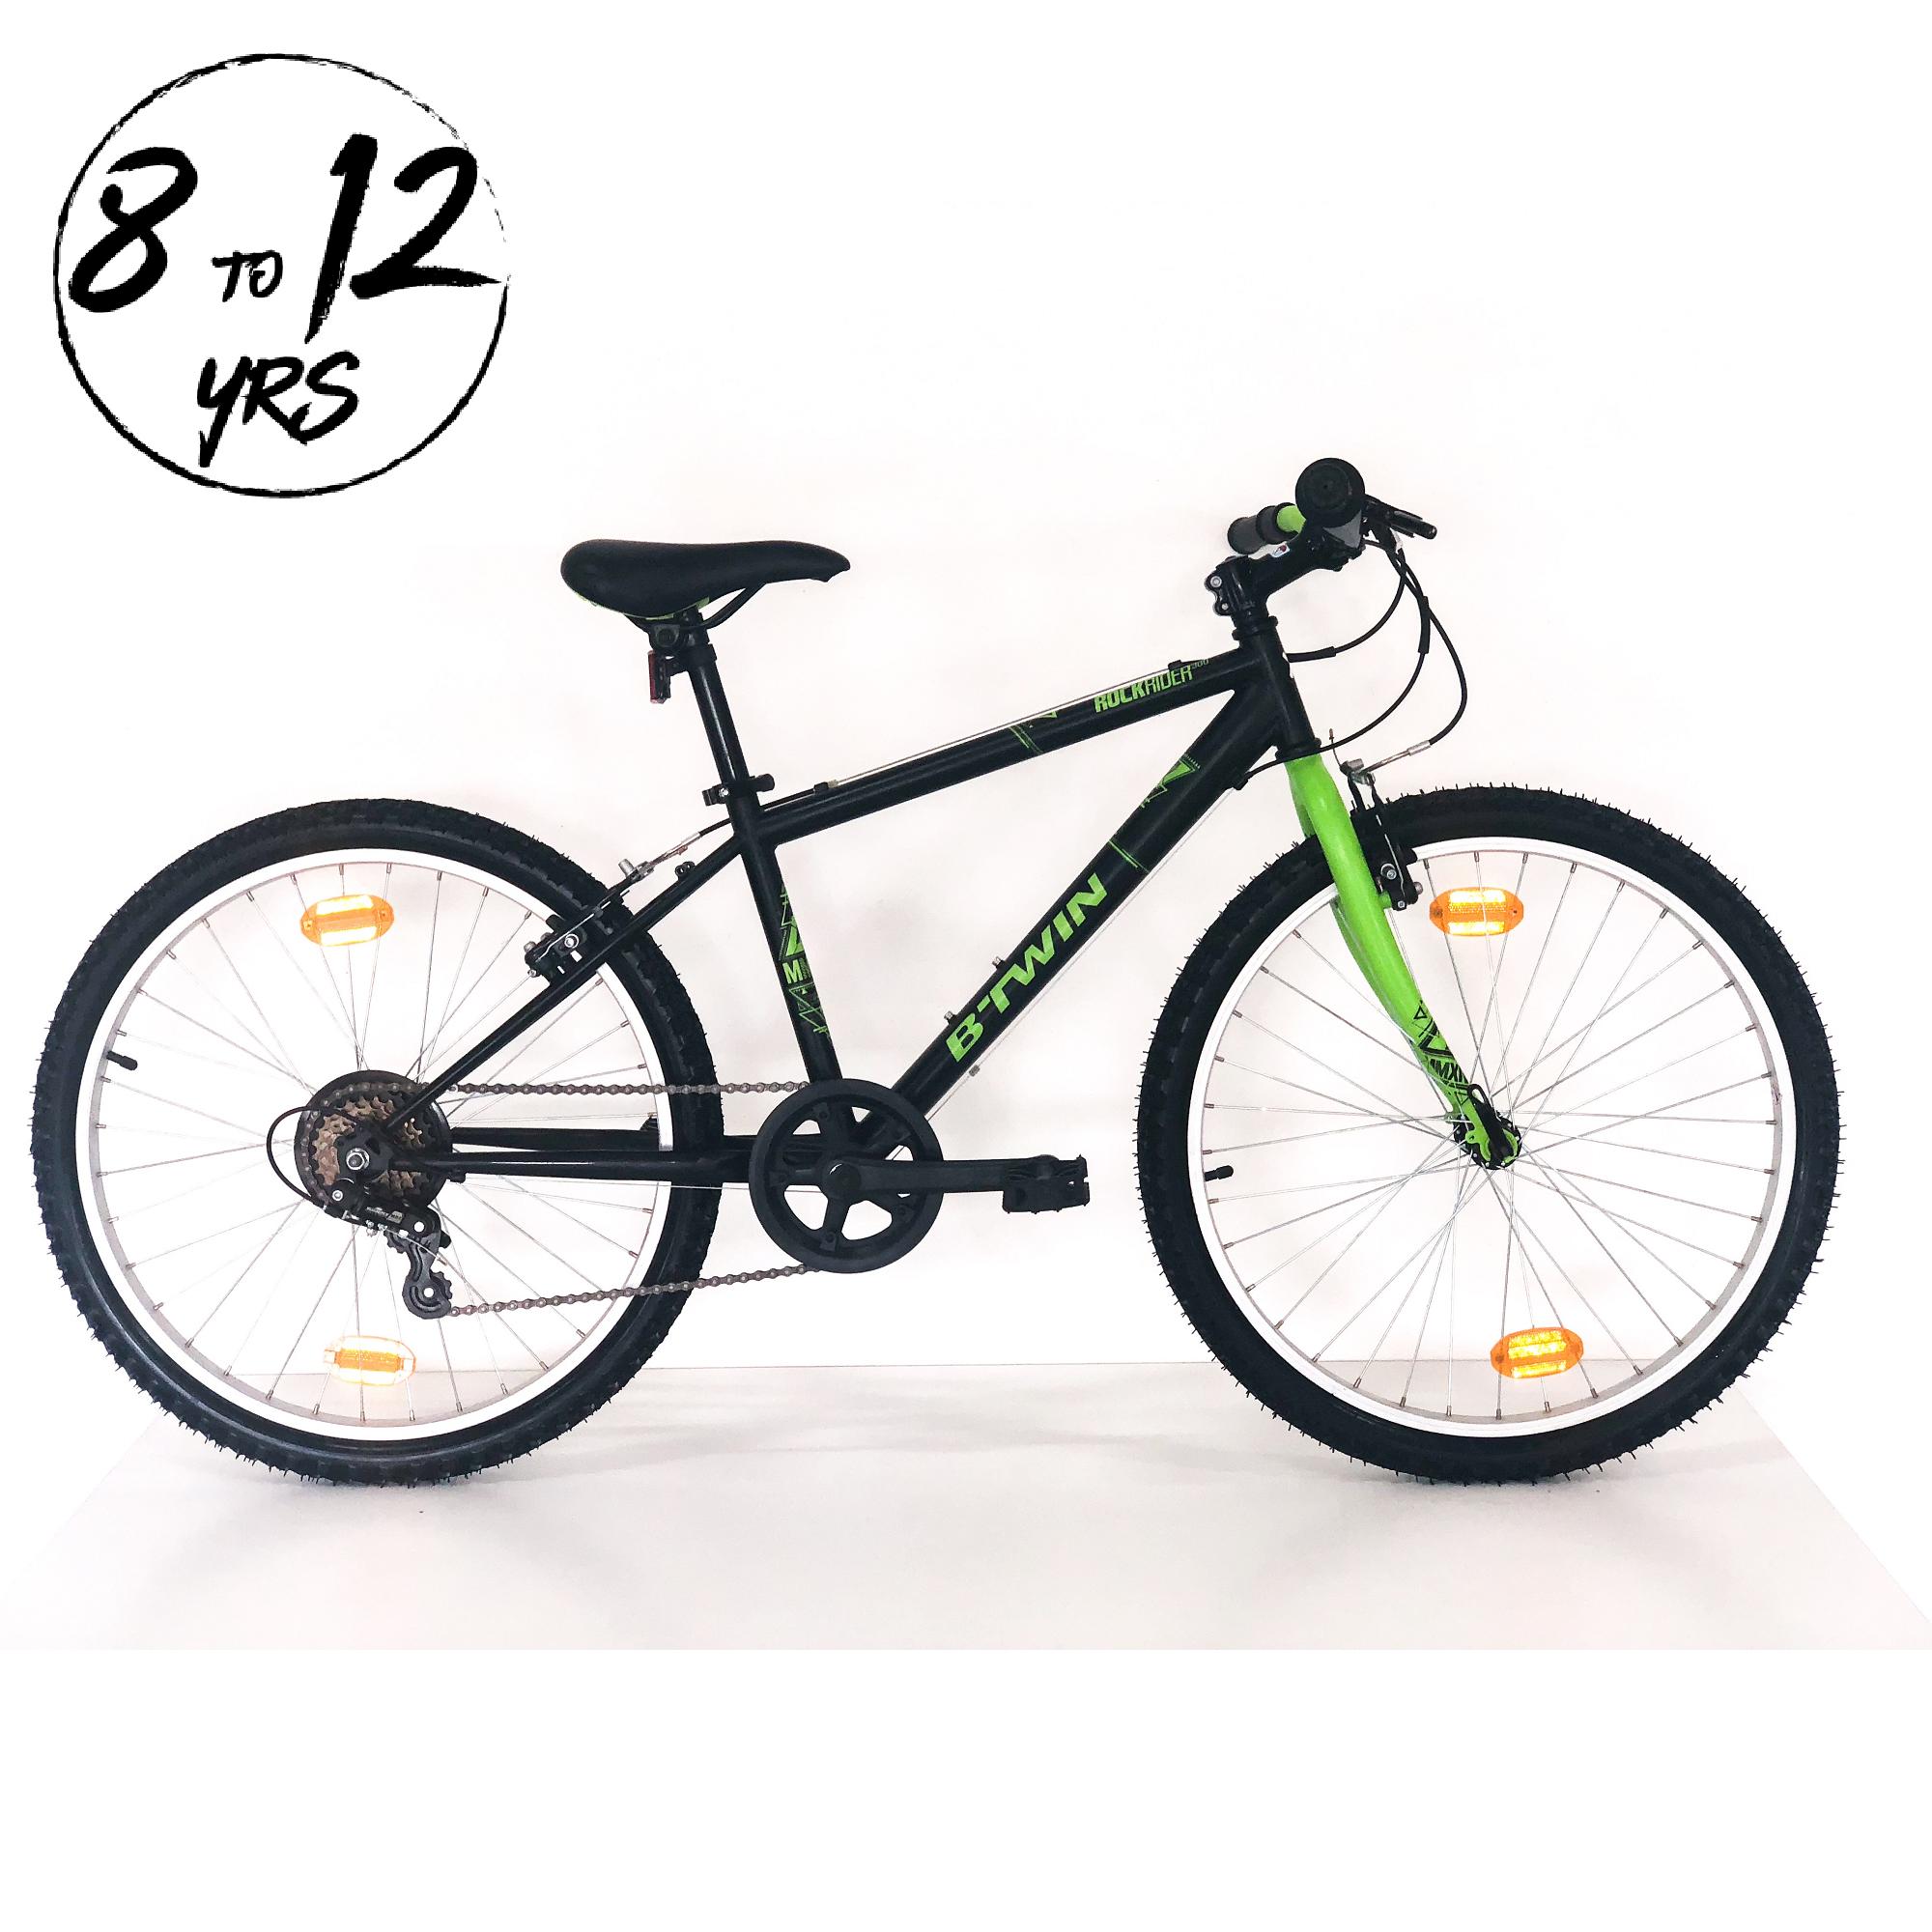 Buy Btwin Cycle Online at Decathlon India